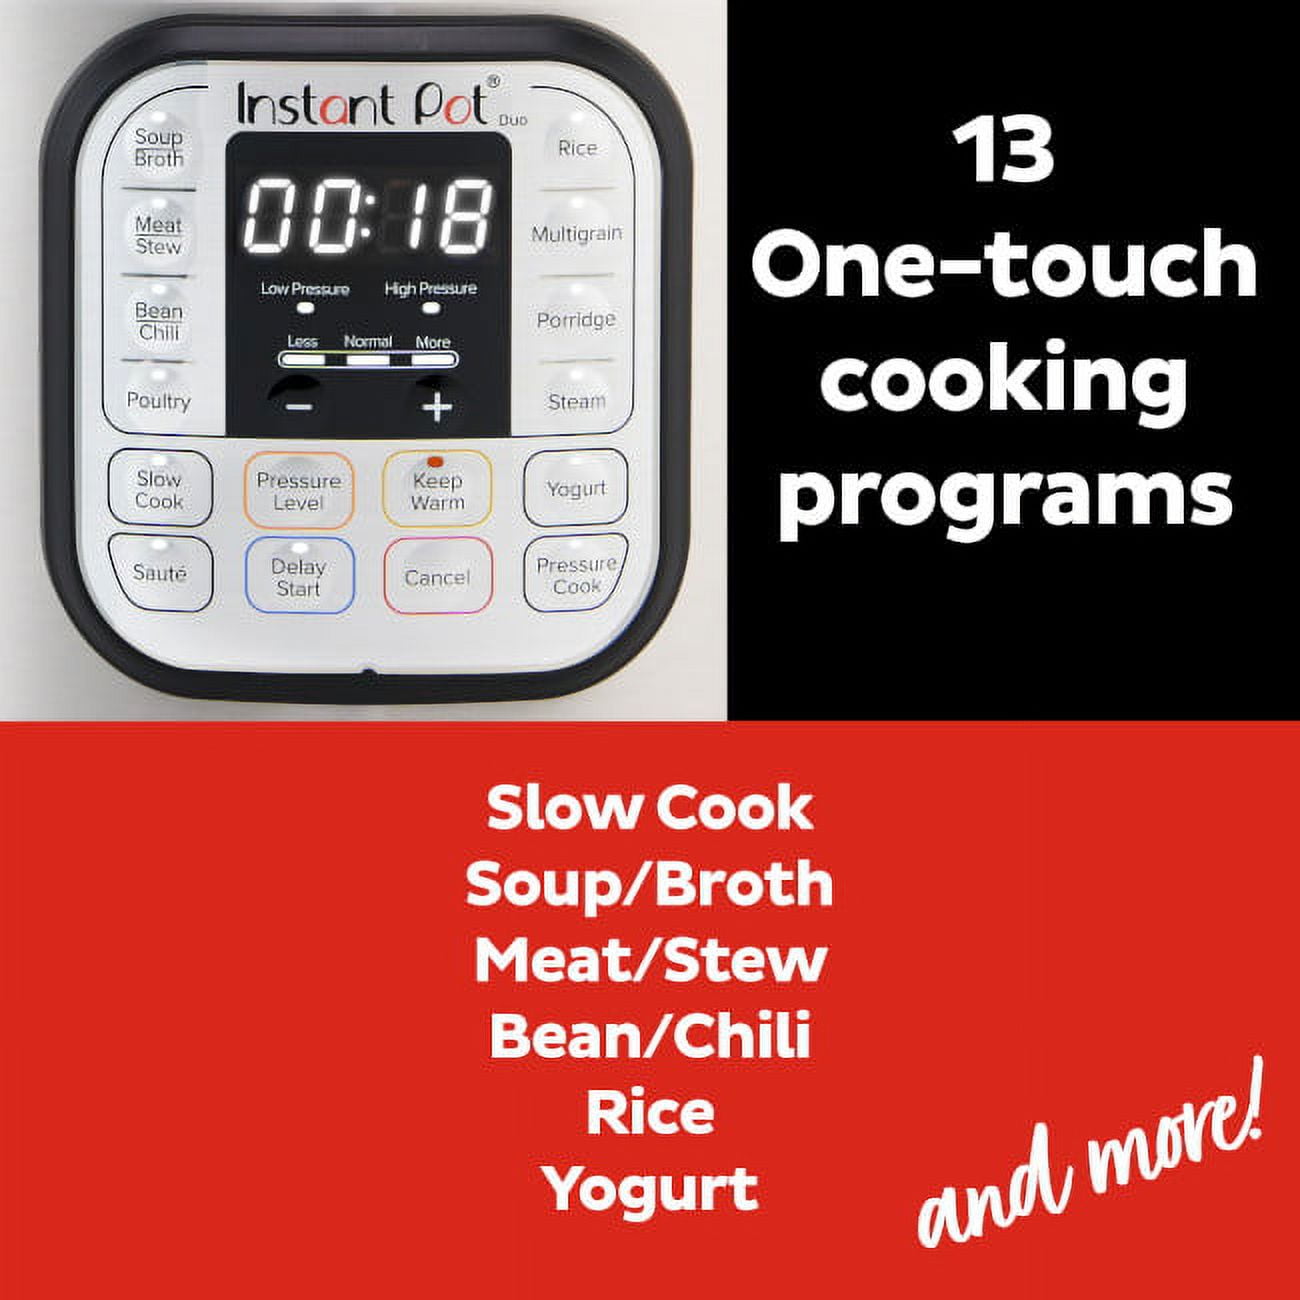 Instant Pot Duo 7-in-1 Electric … curated on LTK